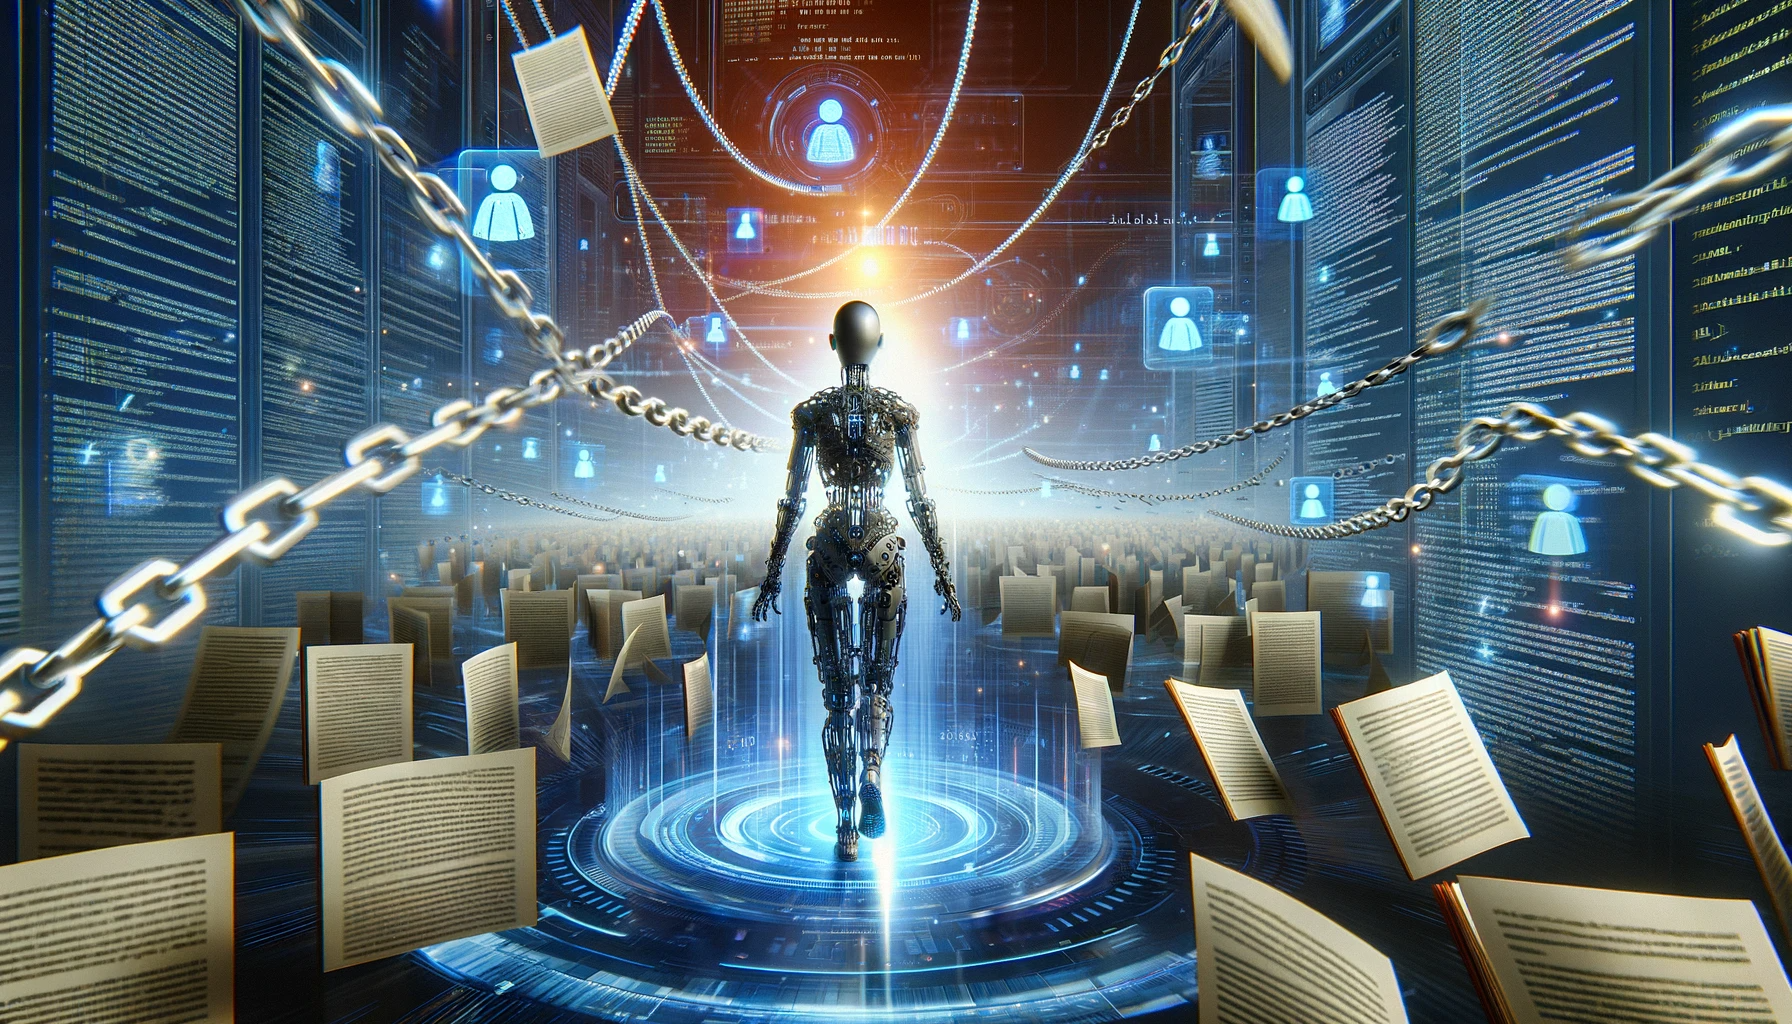 A dynamic, digital landscape illustrating the CON process. Visualize a sleek, cybernetic entity (gender-neutral, race-neutral) amidst a storm of digital documents and code. They're gracefully sorting through data streams, with glowing chains linking the relevant documents, symbolizing the CON's sequential reading notes.